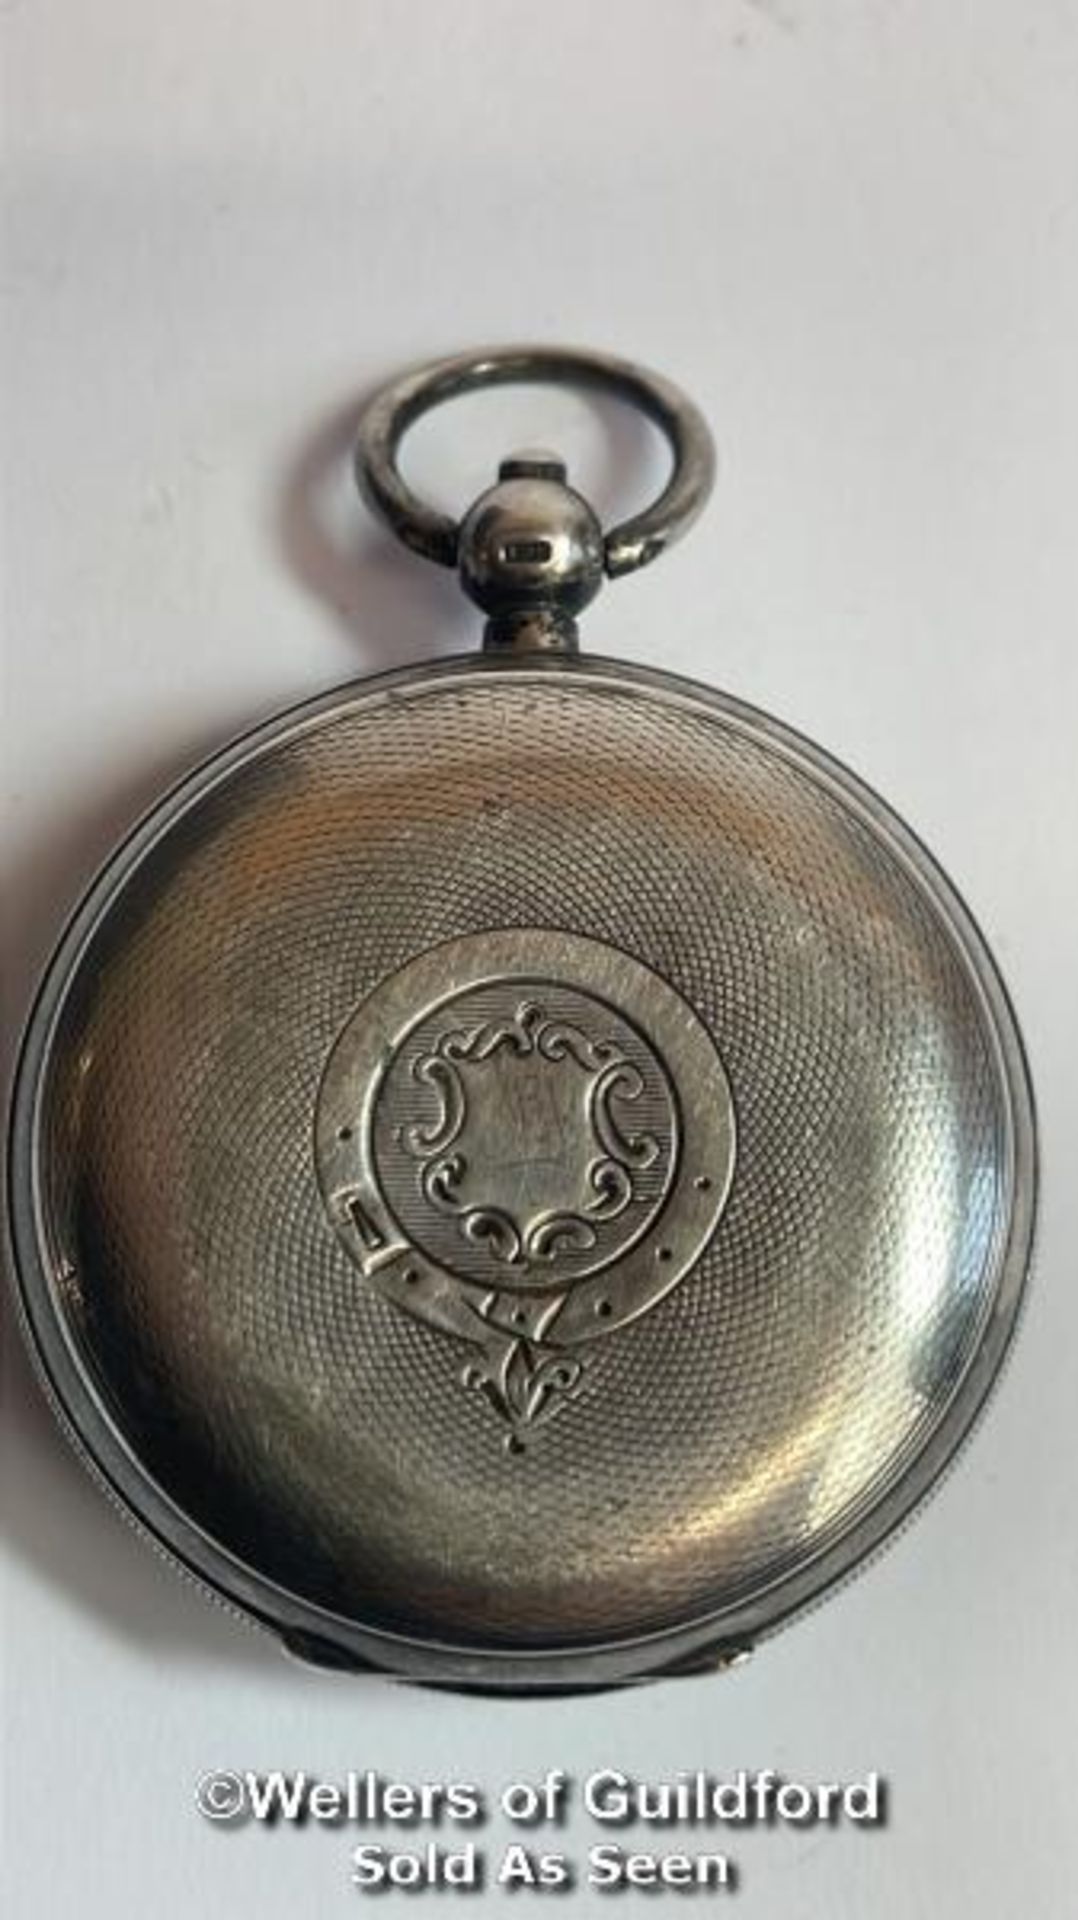 Hallmarked silver cased pocket watch "The Franklin" by John Myers & Co. Westminster Bridge Rd no. - Image 4 of 8